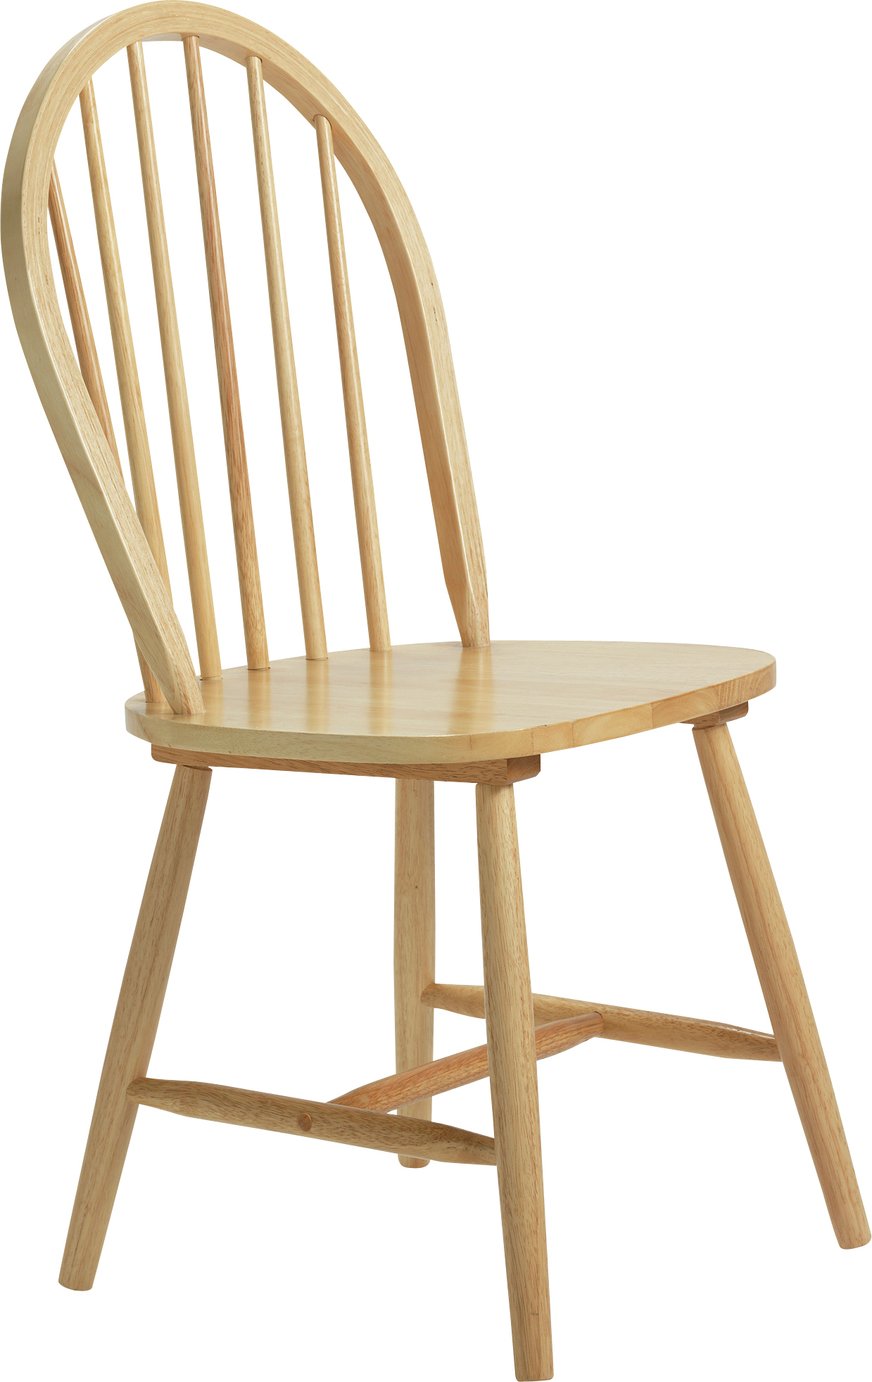 Argos Home Kentucky Extendable Solid Wood Table & 4 Chairs Reviews